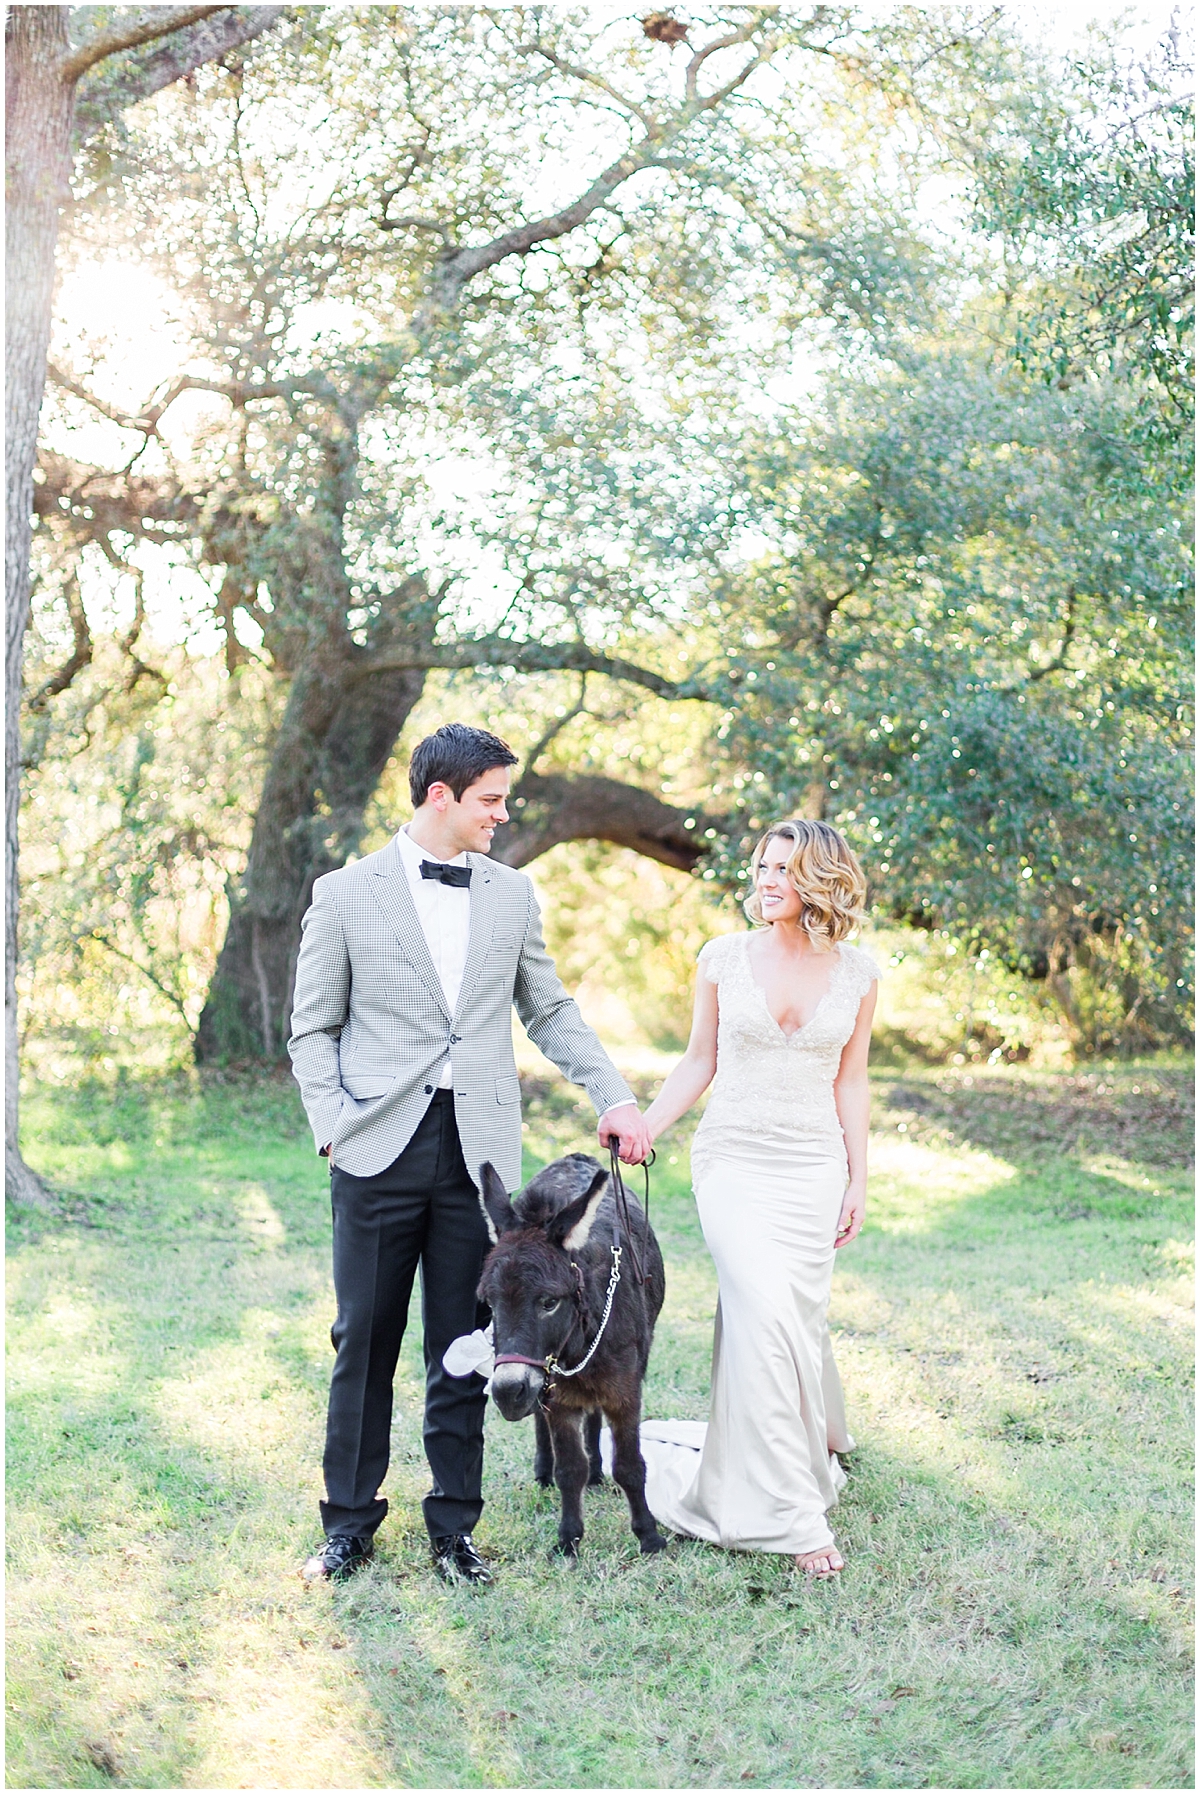 a-classic-modern-black-and-white-wedding-with-gold-accents-inspirational-shoot-at-pecan-springs-ranch-by-allison-jeffers-wedding-photography-dripping-springs-wedding-photographer_0058